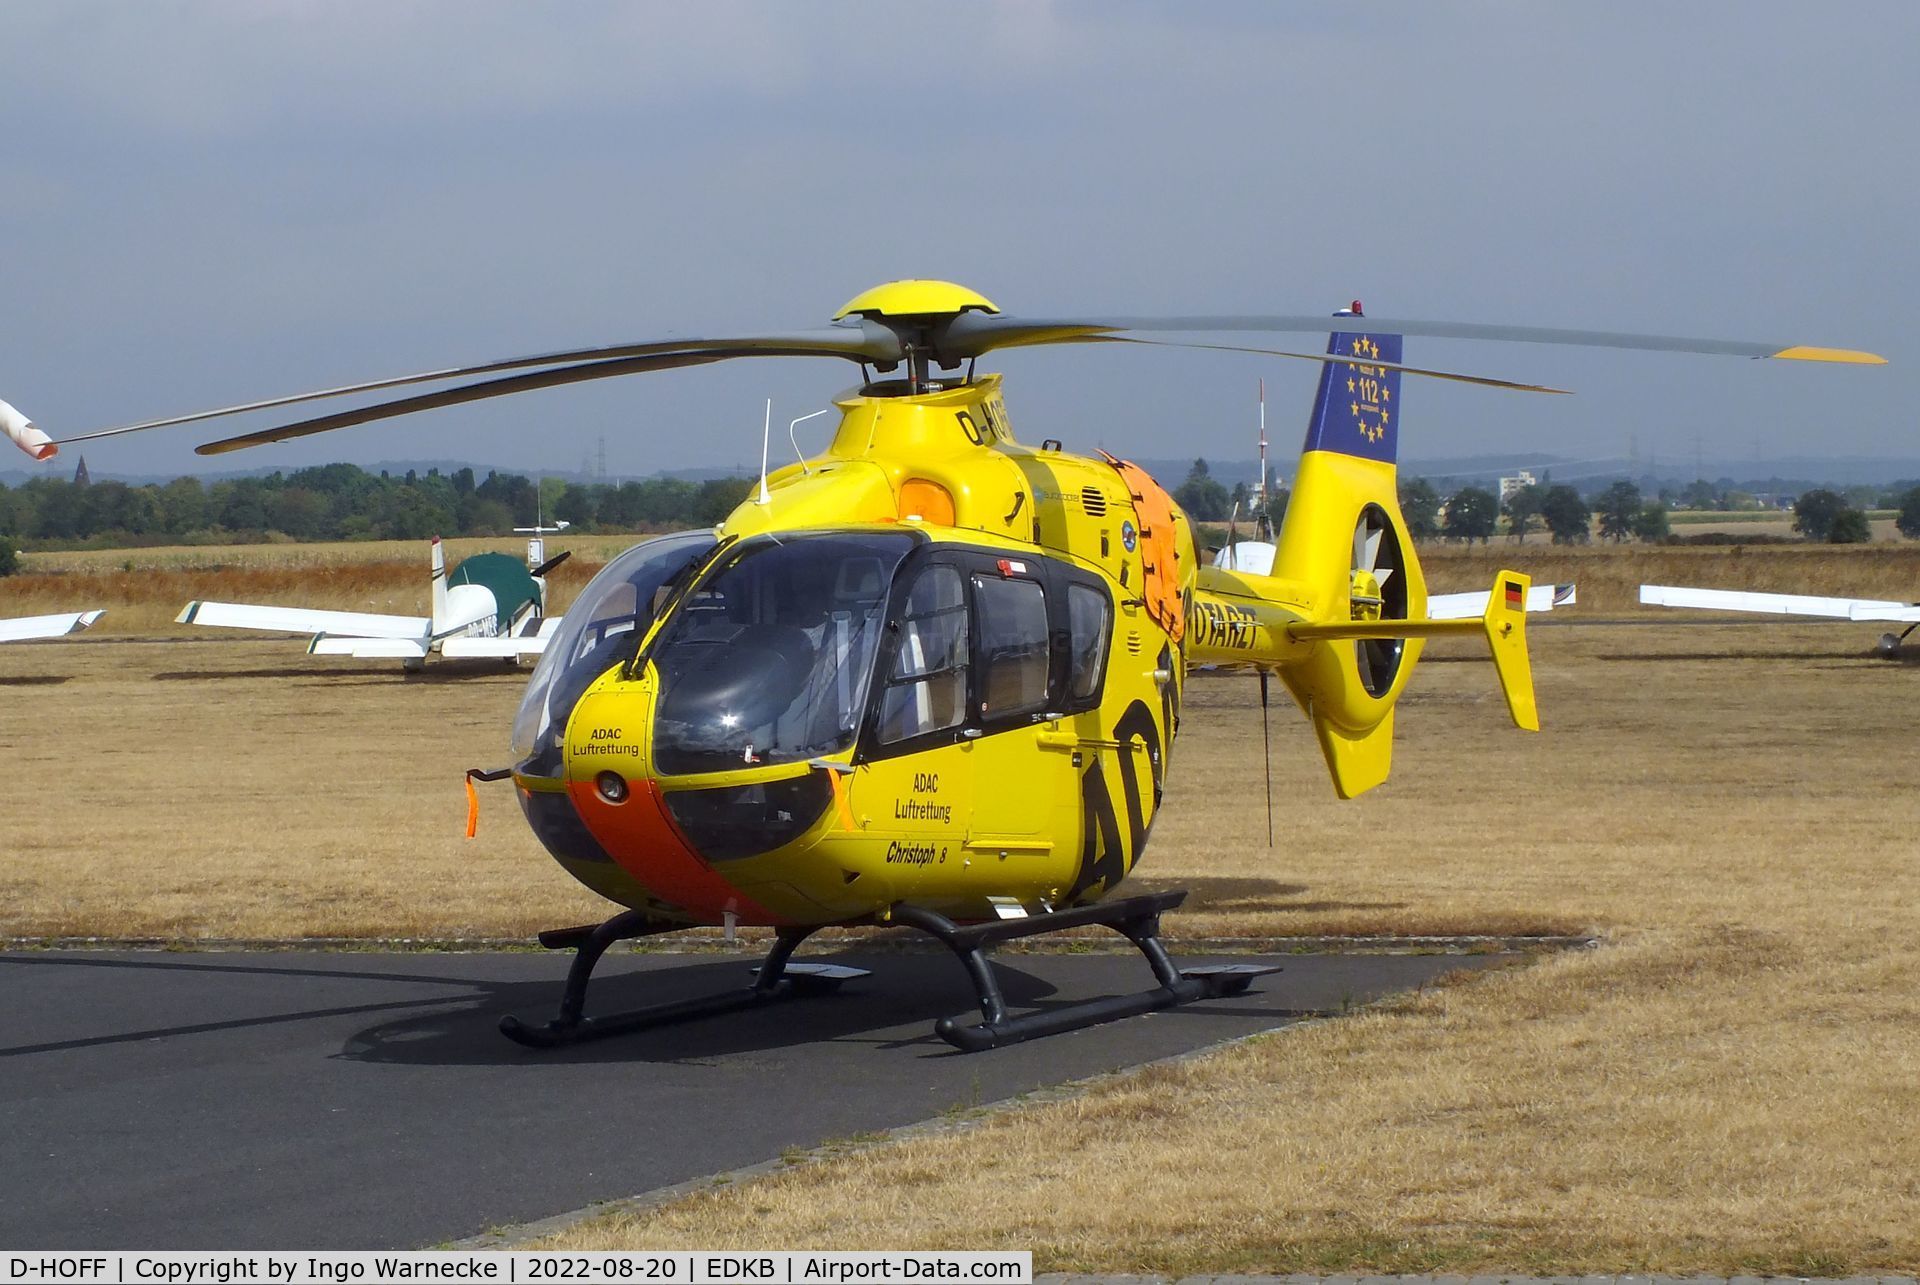 D-HOFF, 2002 Eurocopter EC-135 P2+ C/N 0260, Eurocopter EC135P2+ 'Christoph 8' EMS-helicopter of ADAC Luftrettung at Bonn-Hangelar airfield during the Grumman Fly-in 2022